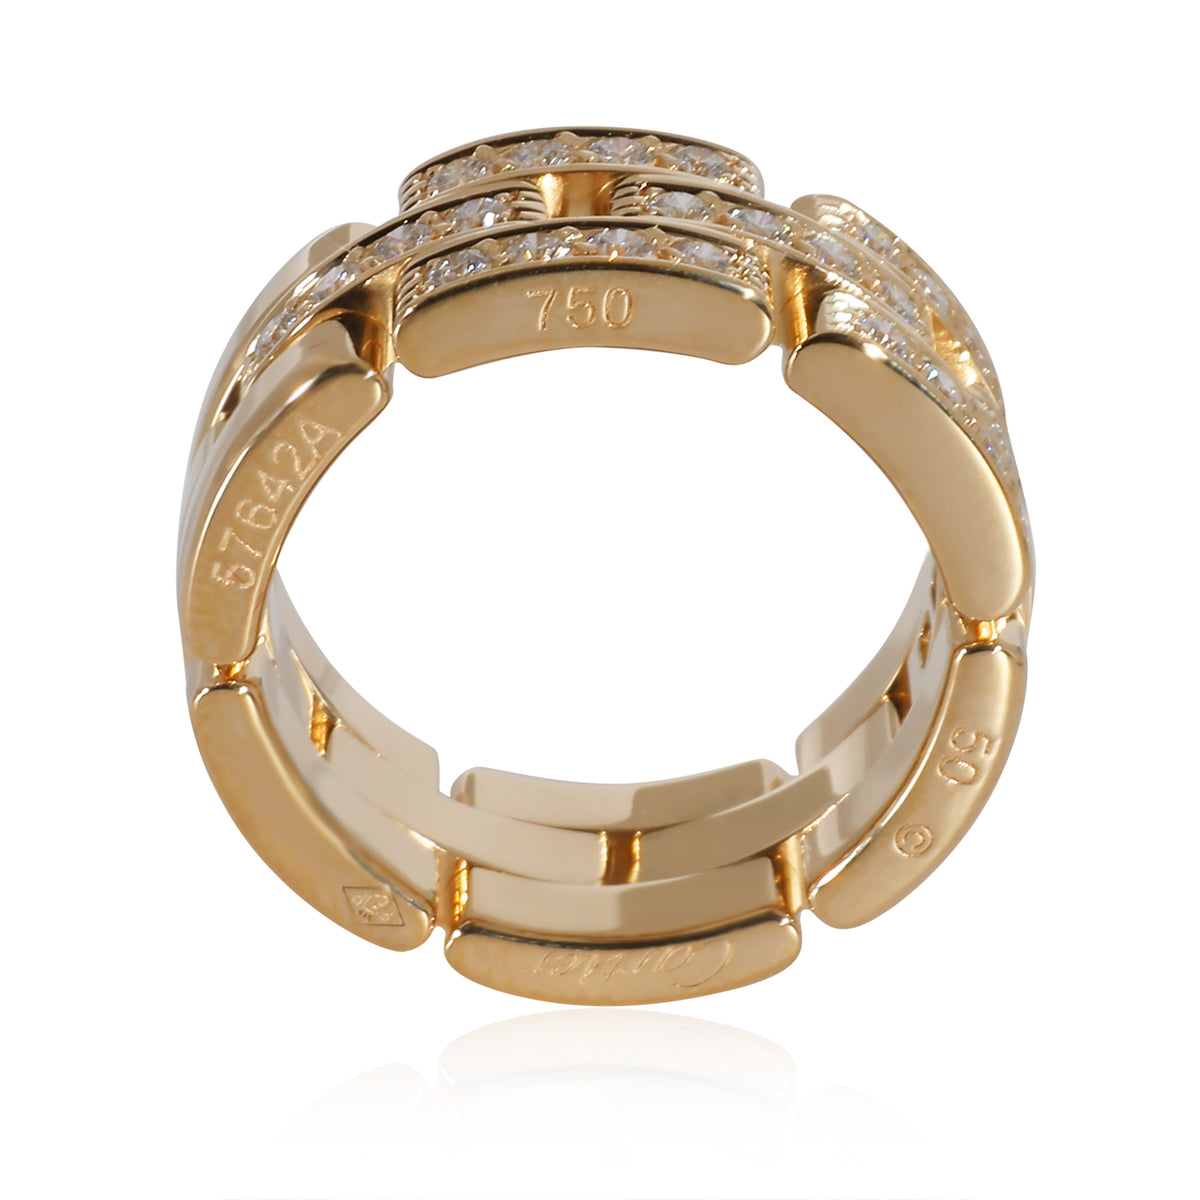 Maillon Panthere Band in 18k Yellow Gold 0.53 CTW